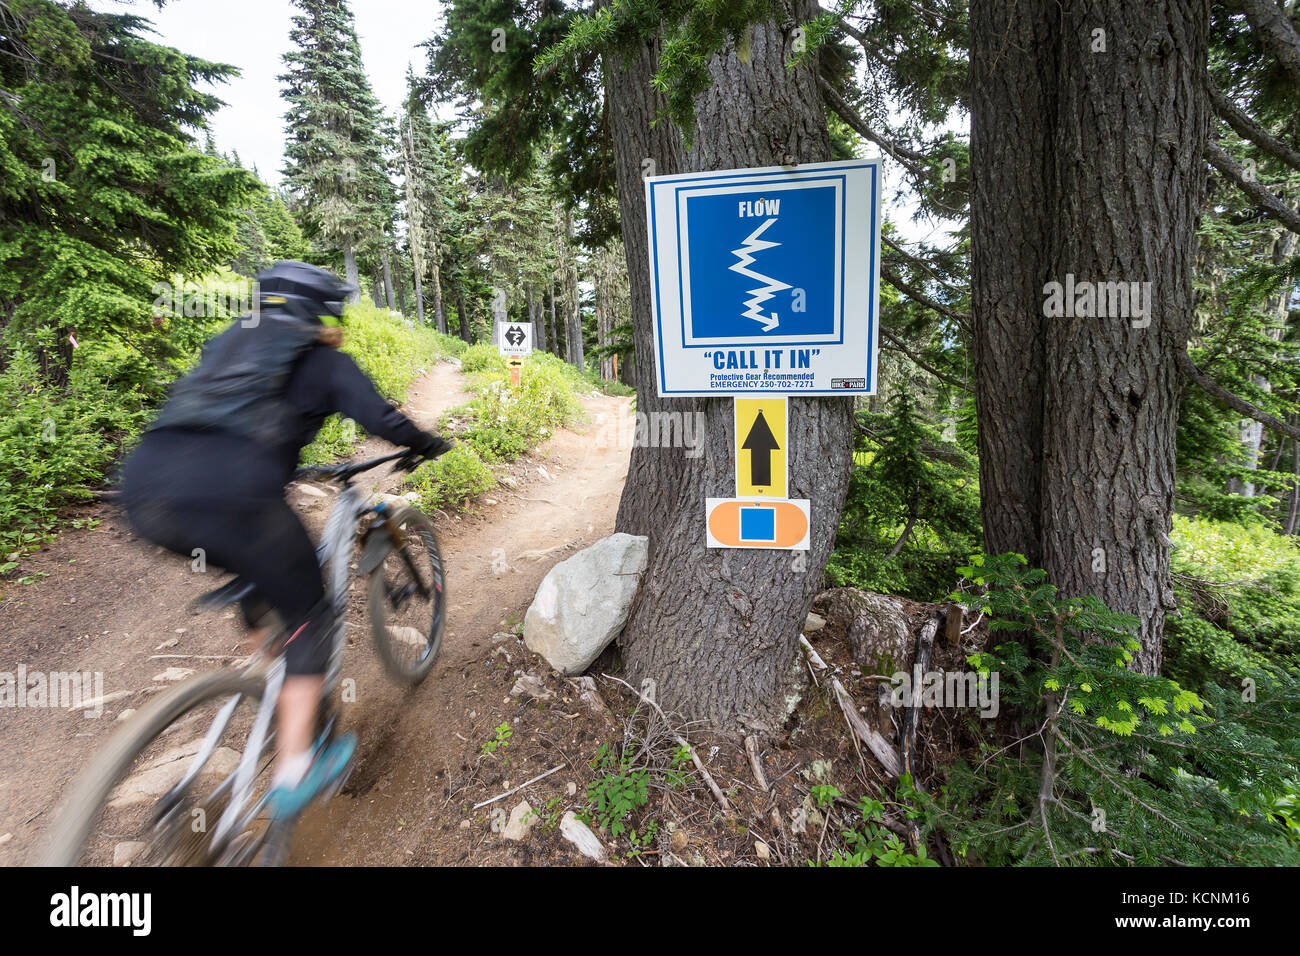 Mountain bikers riding down 'Call It In' ride through an intersection leading to the 'Monster Mile' near the top of the Hawk chairlift at Mt. Washington, The Comox Valley, Vancouver Island, British Columbia, Canada. Stock Photo